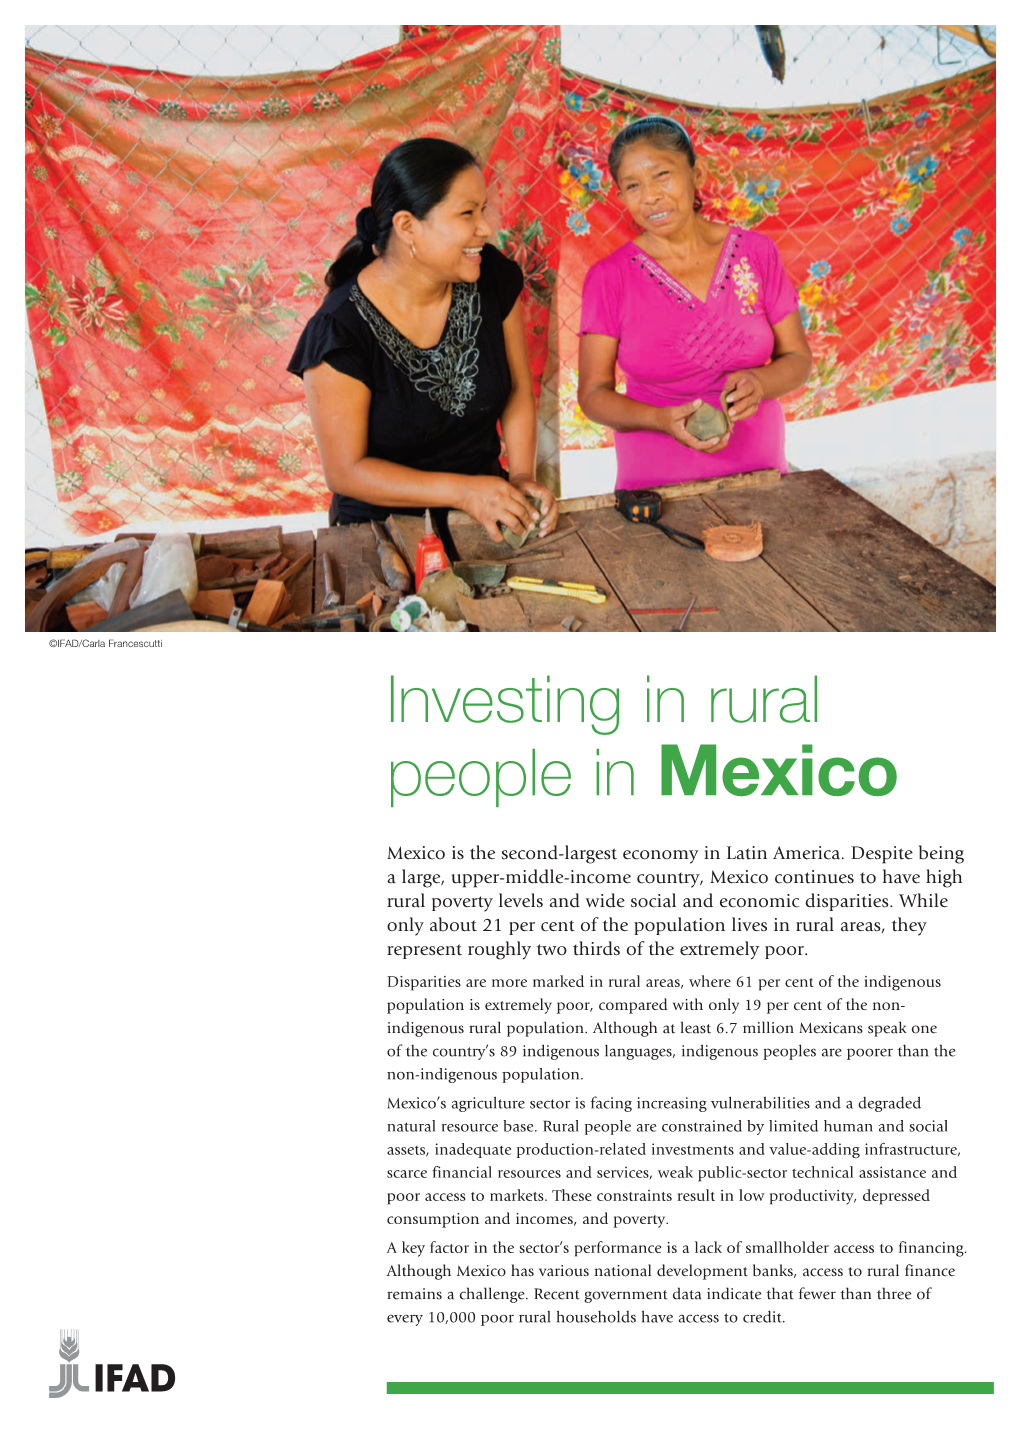 Rural Poverty in Mexico in 2015, Approximately 21 Per Cent of the Population Lived in Rural Areas of the Country